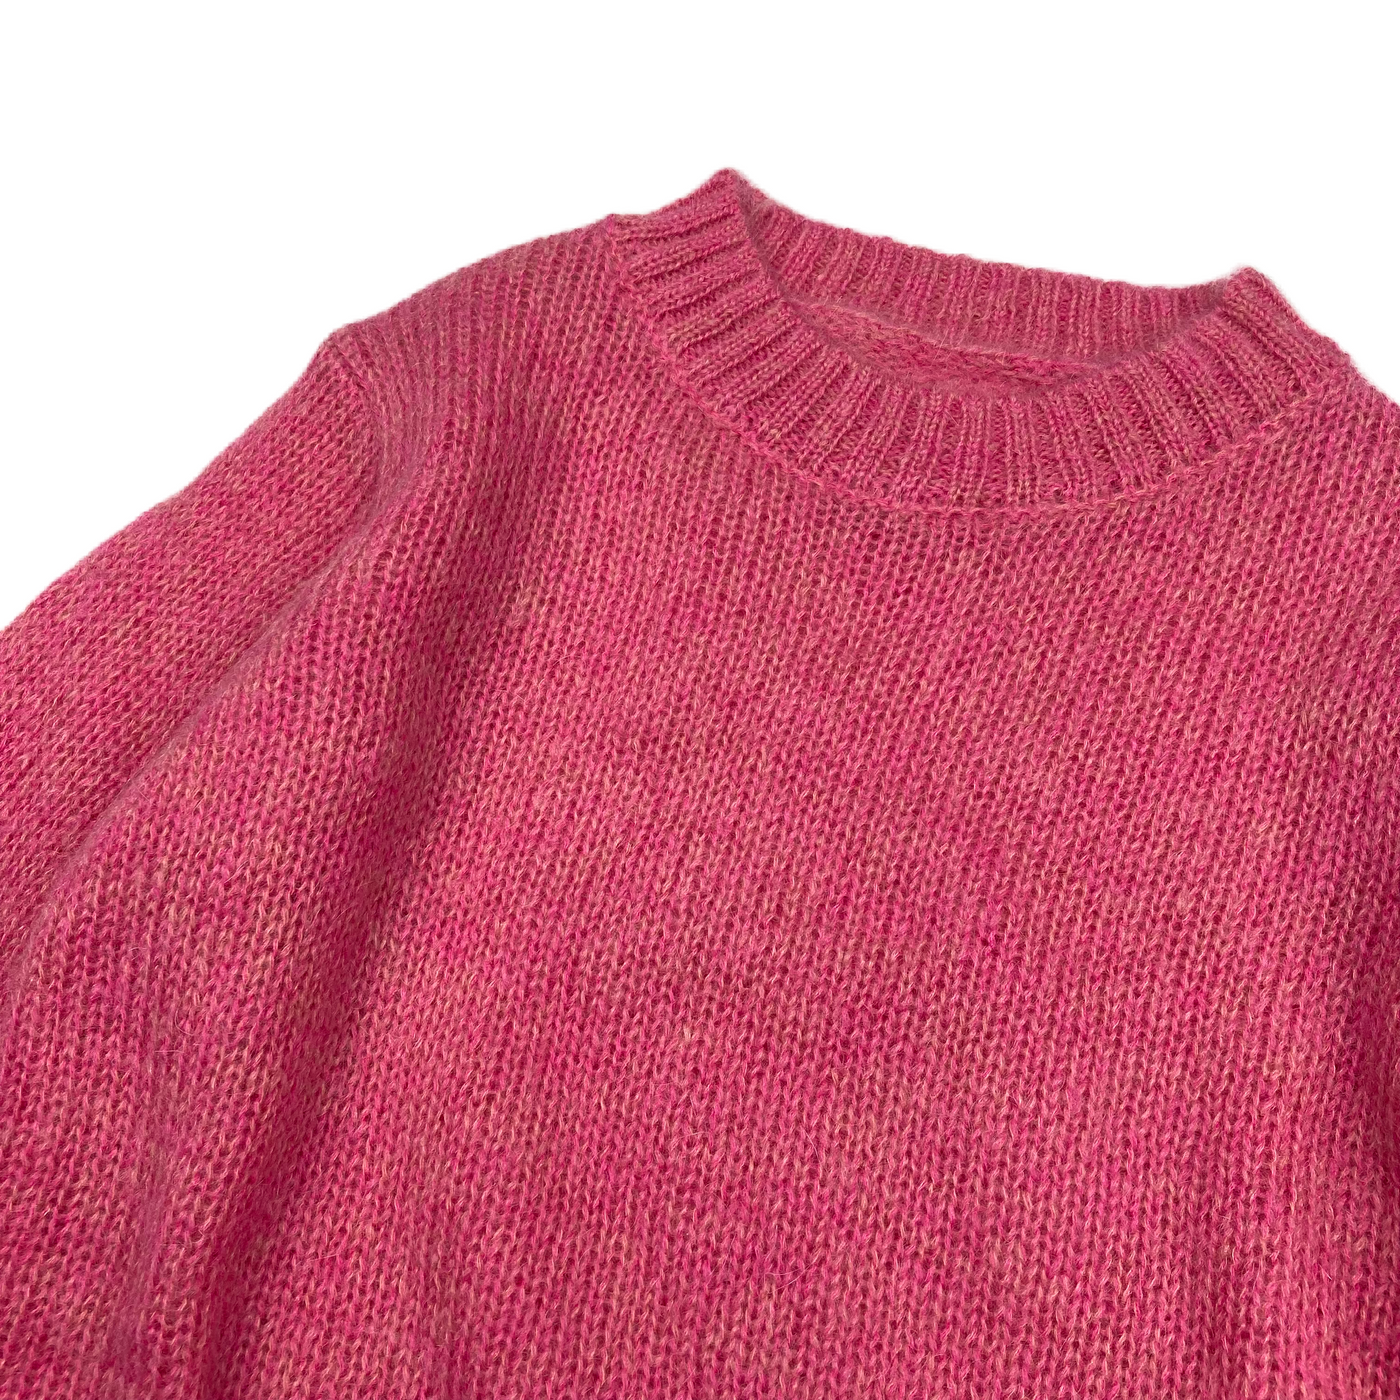 Repose ams. - Oversized knitted sweat pinkish coral 2y, 3y & 14y